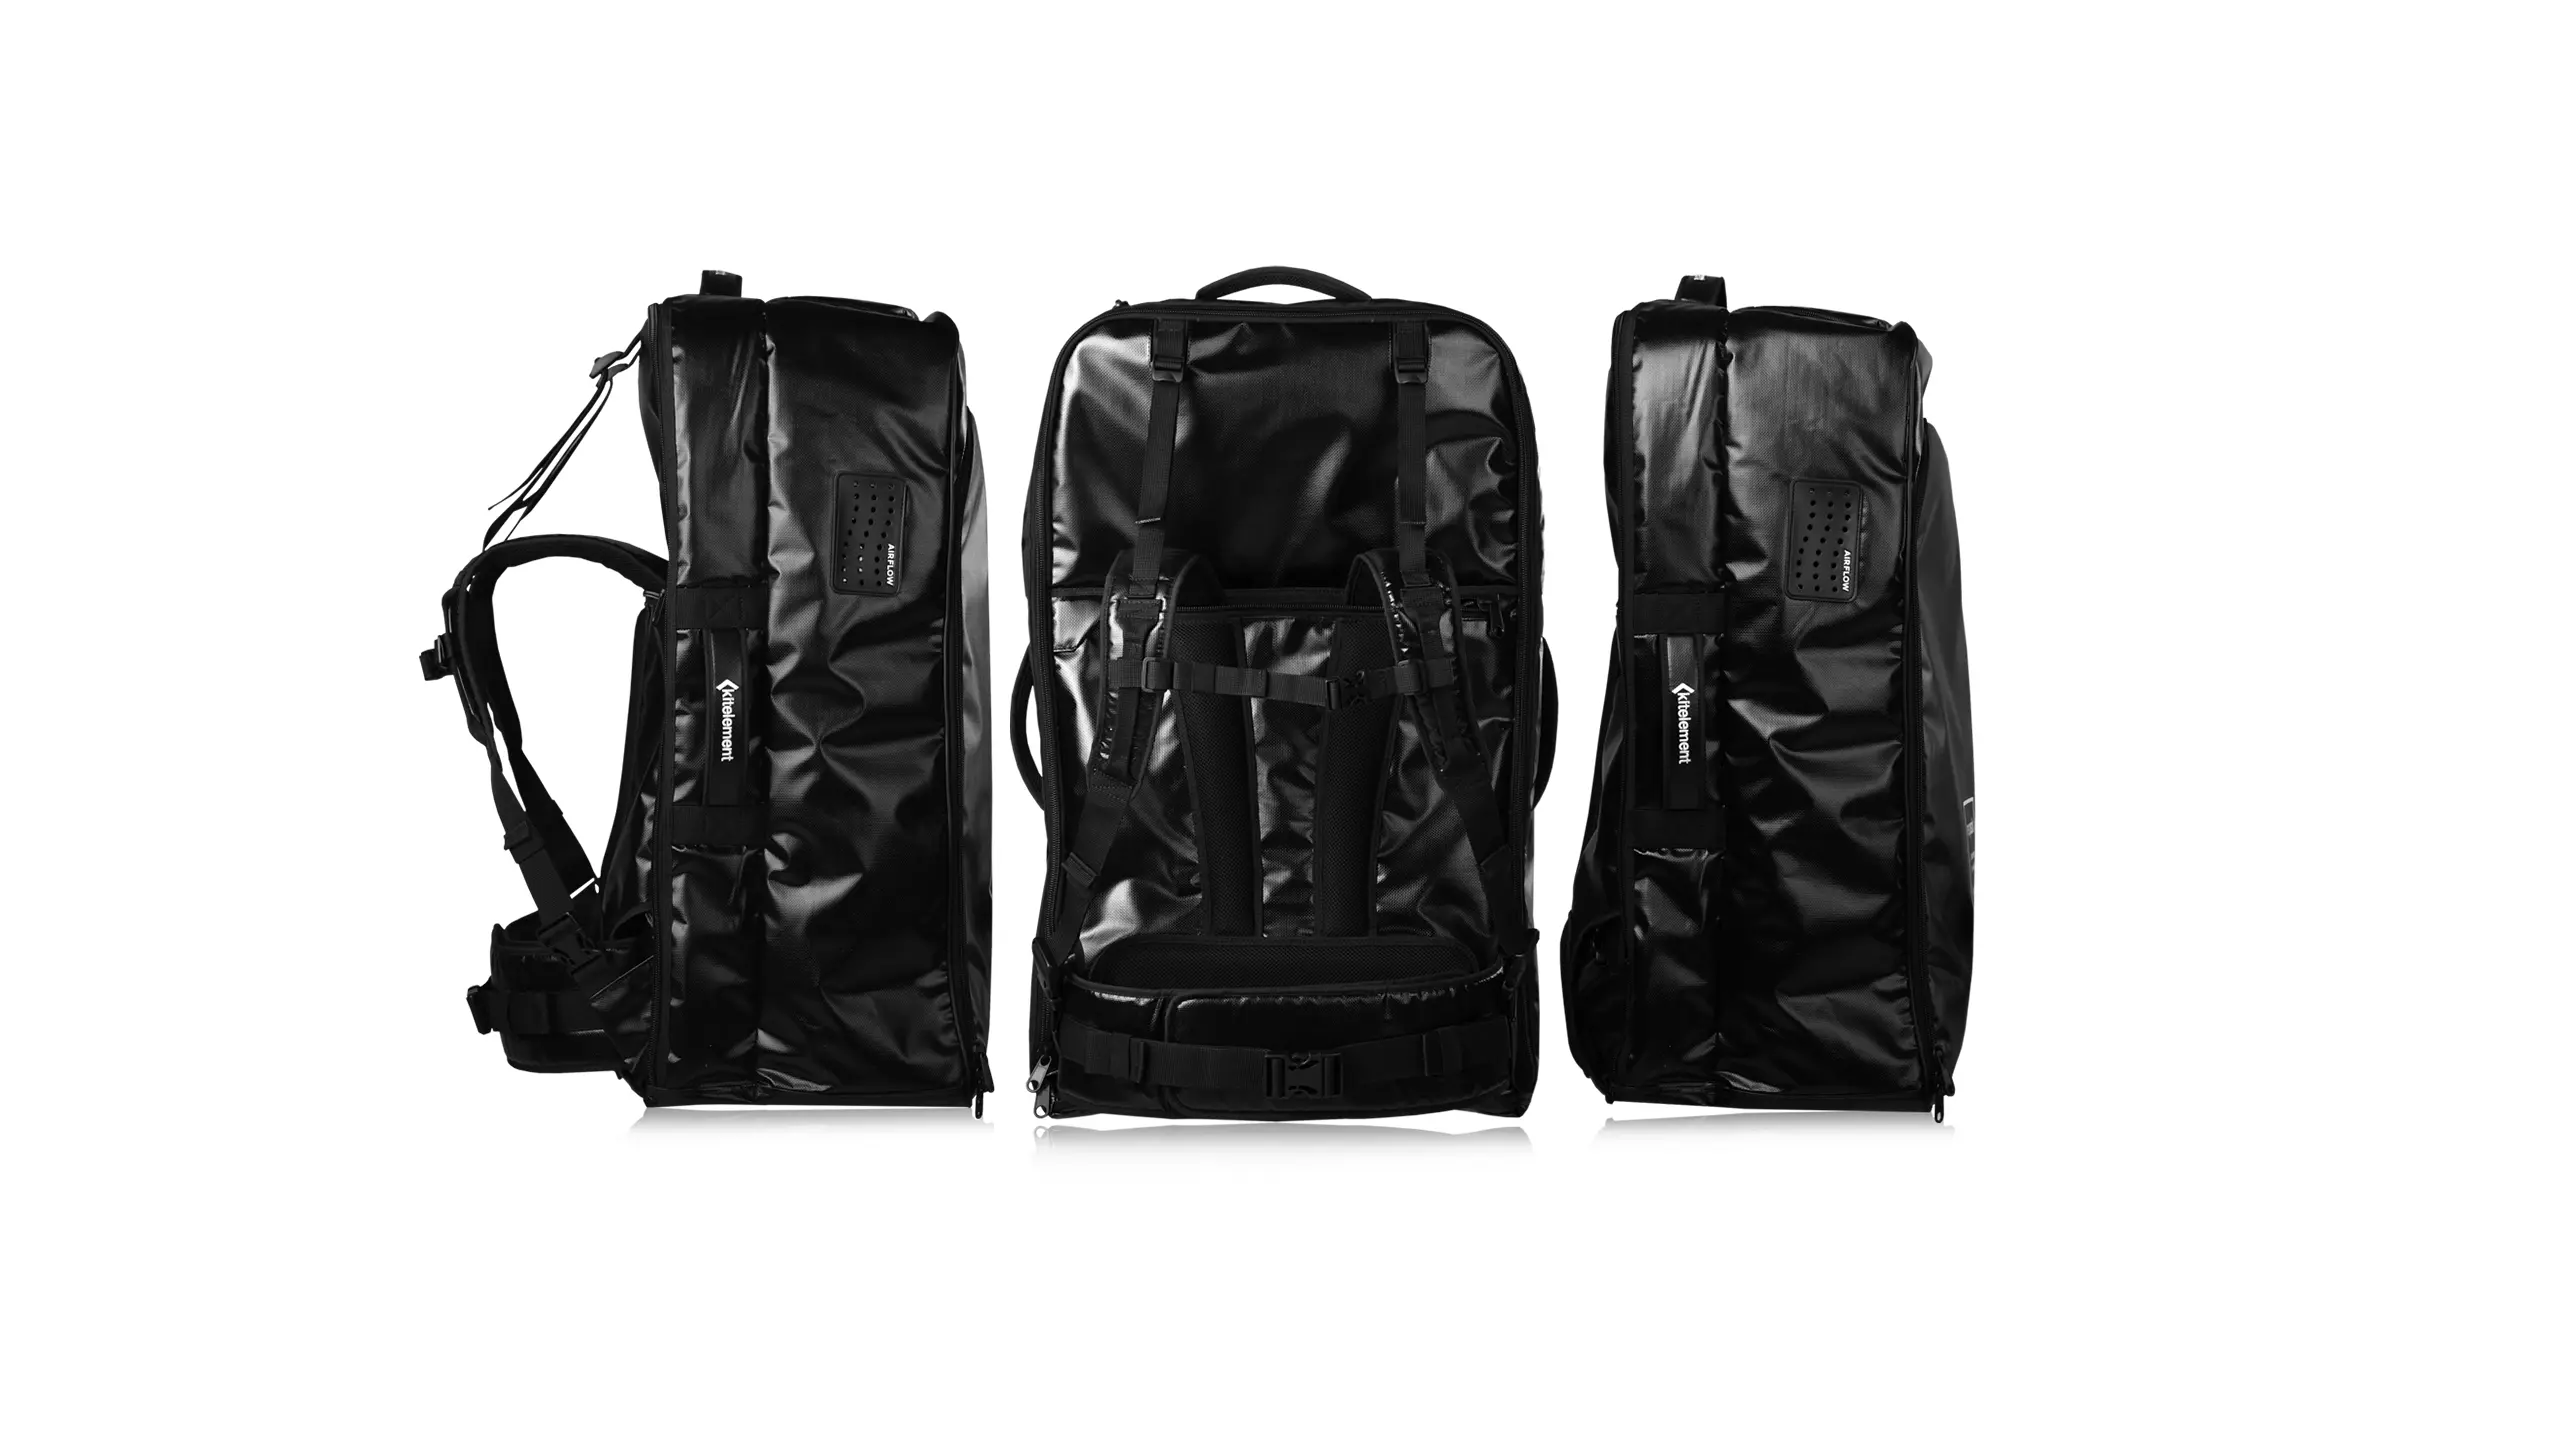 All-gear backpack